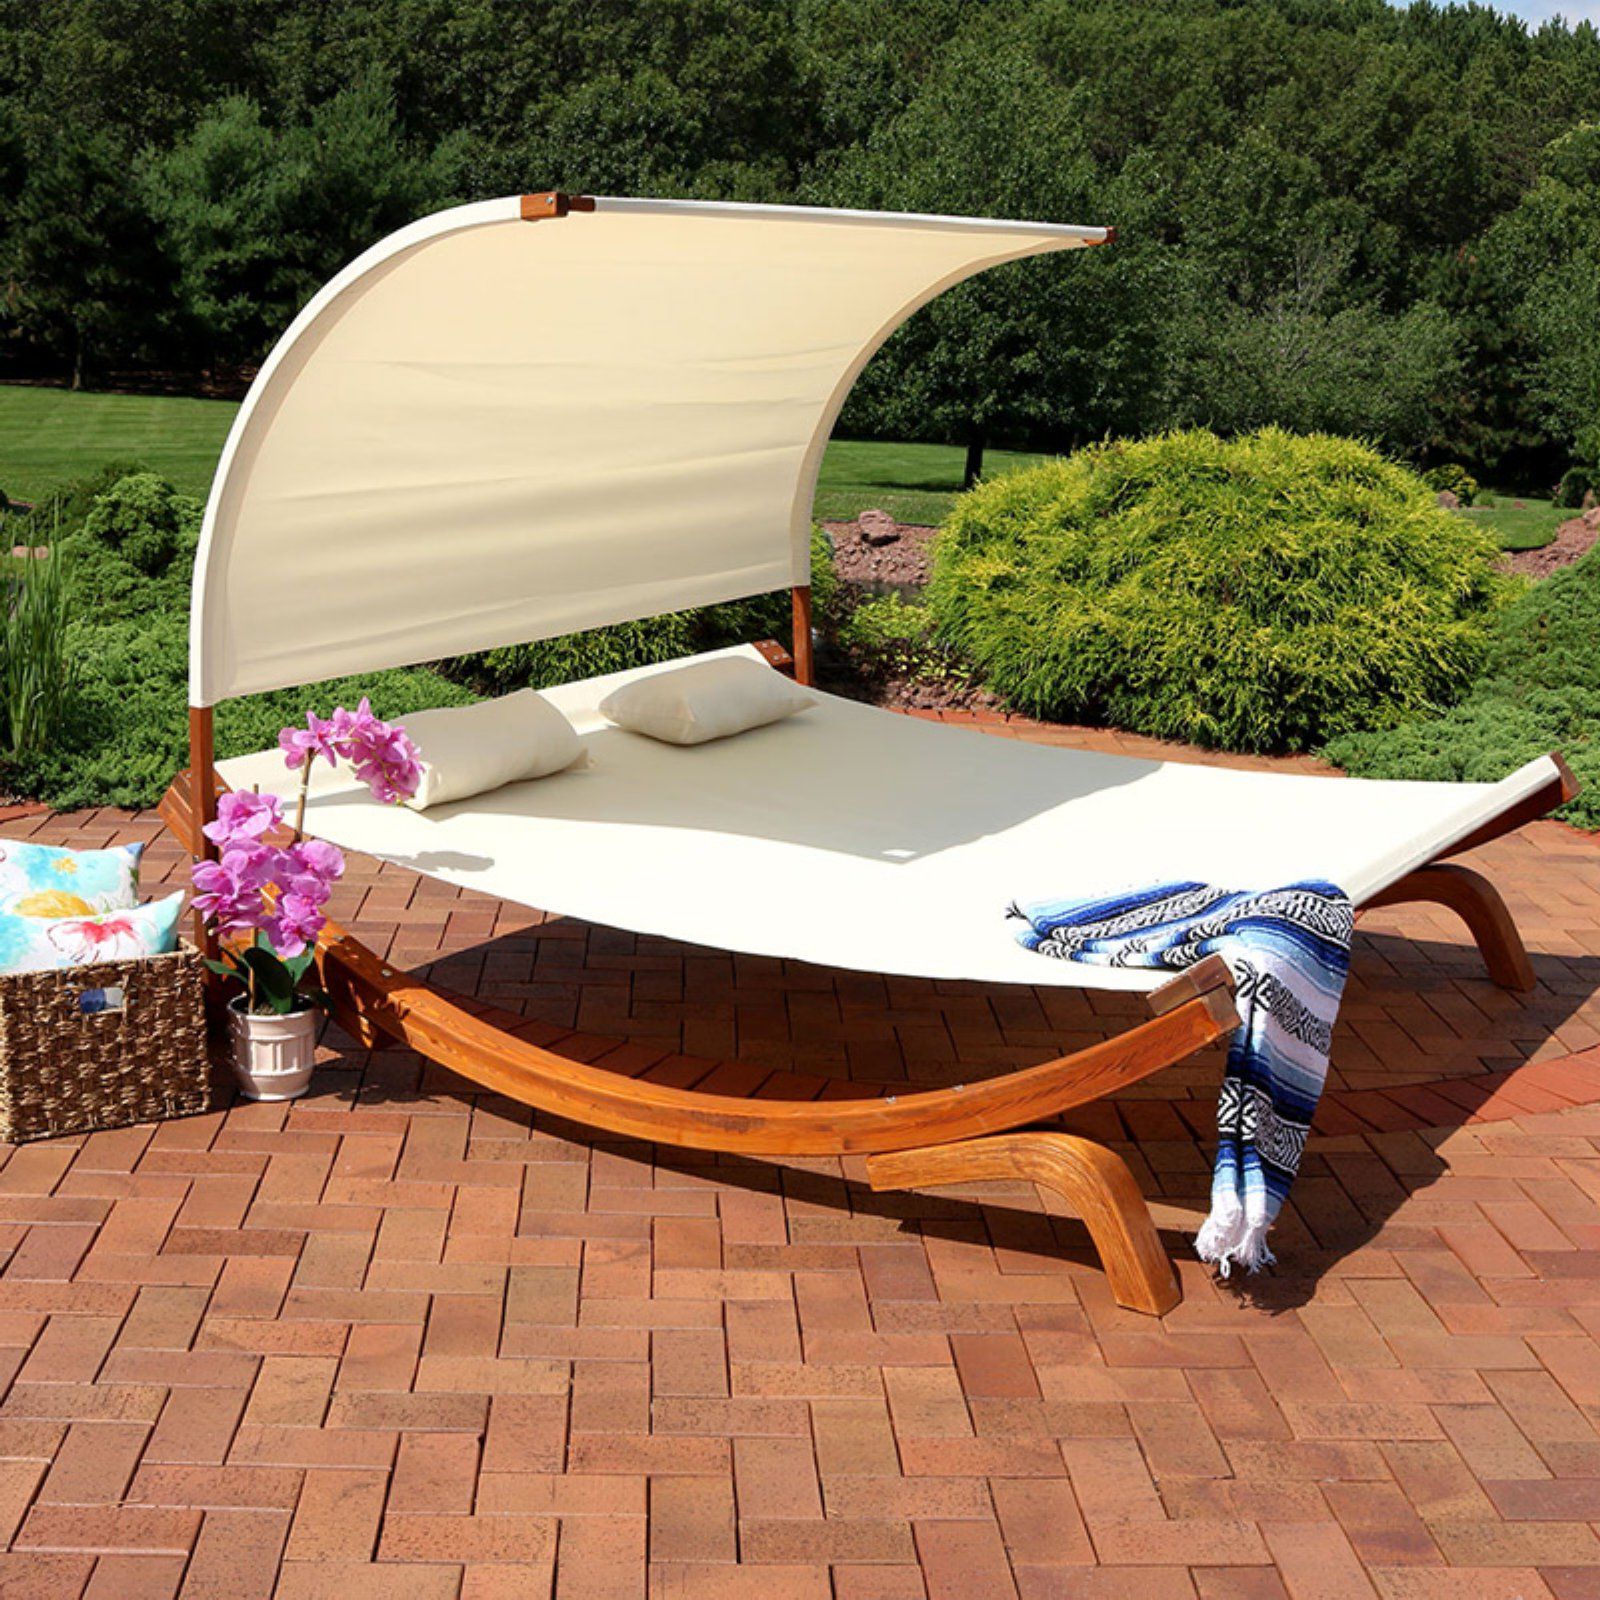 Sunnydaze Decor Natural Colored Outdoor Daybed With Canopy (View 15 of 15)